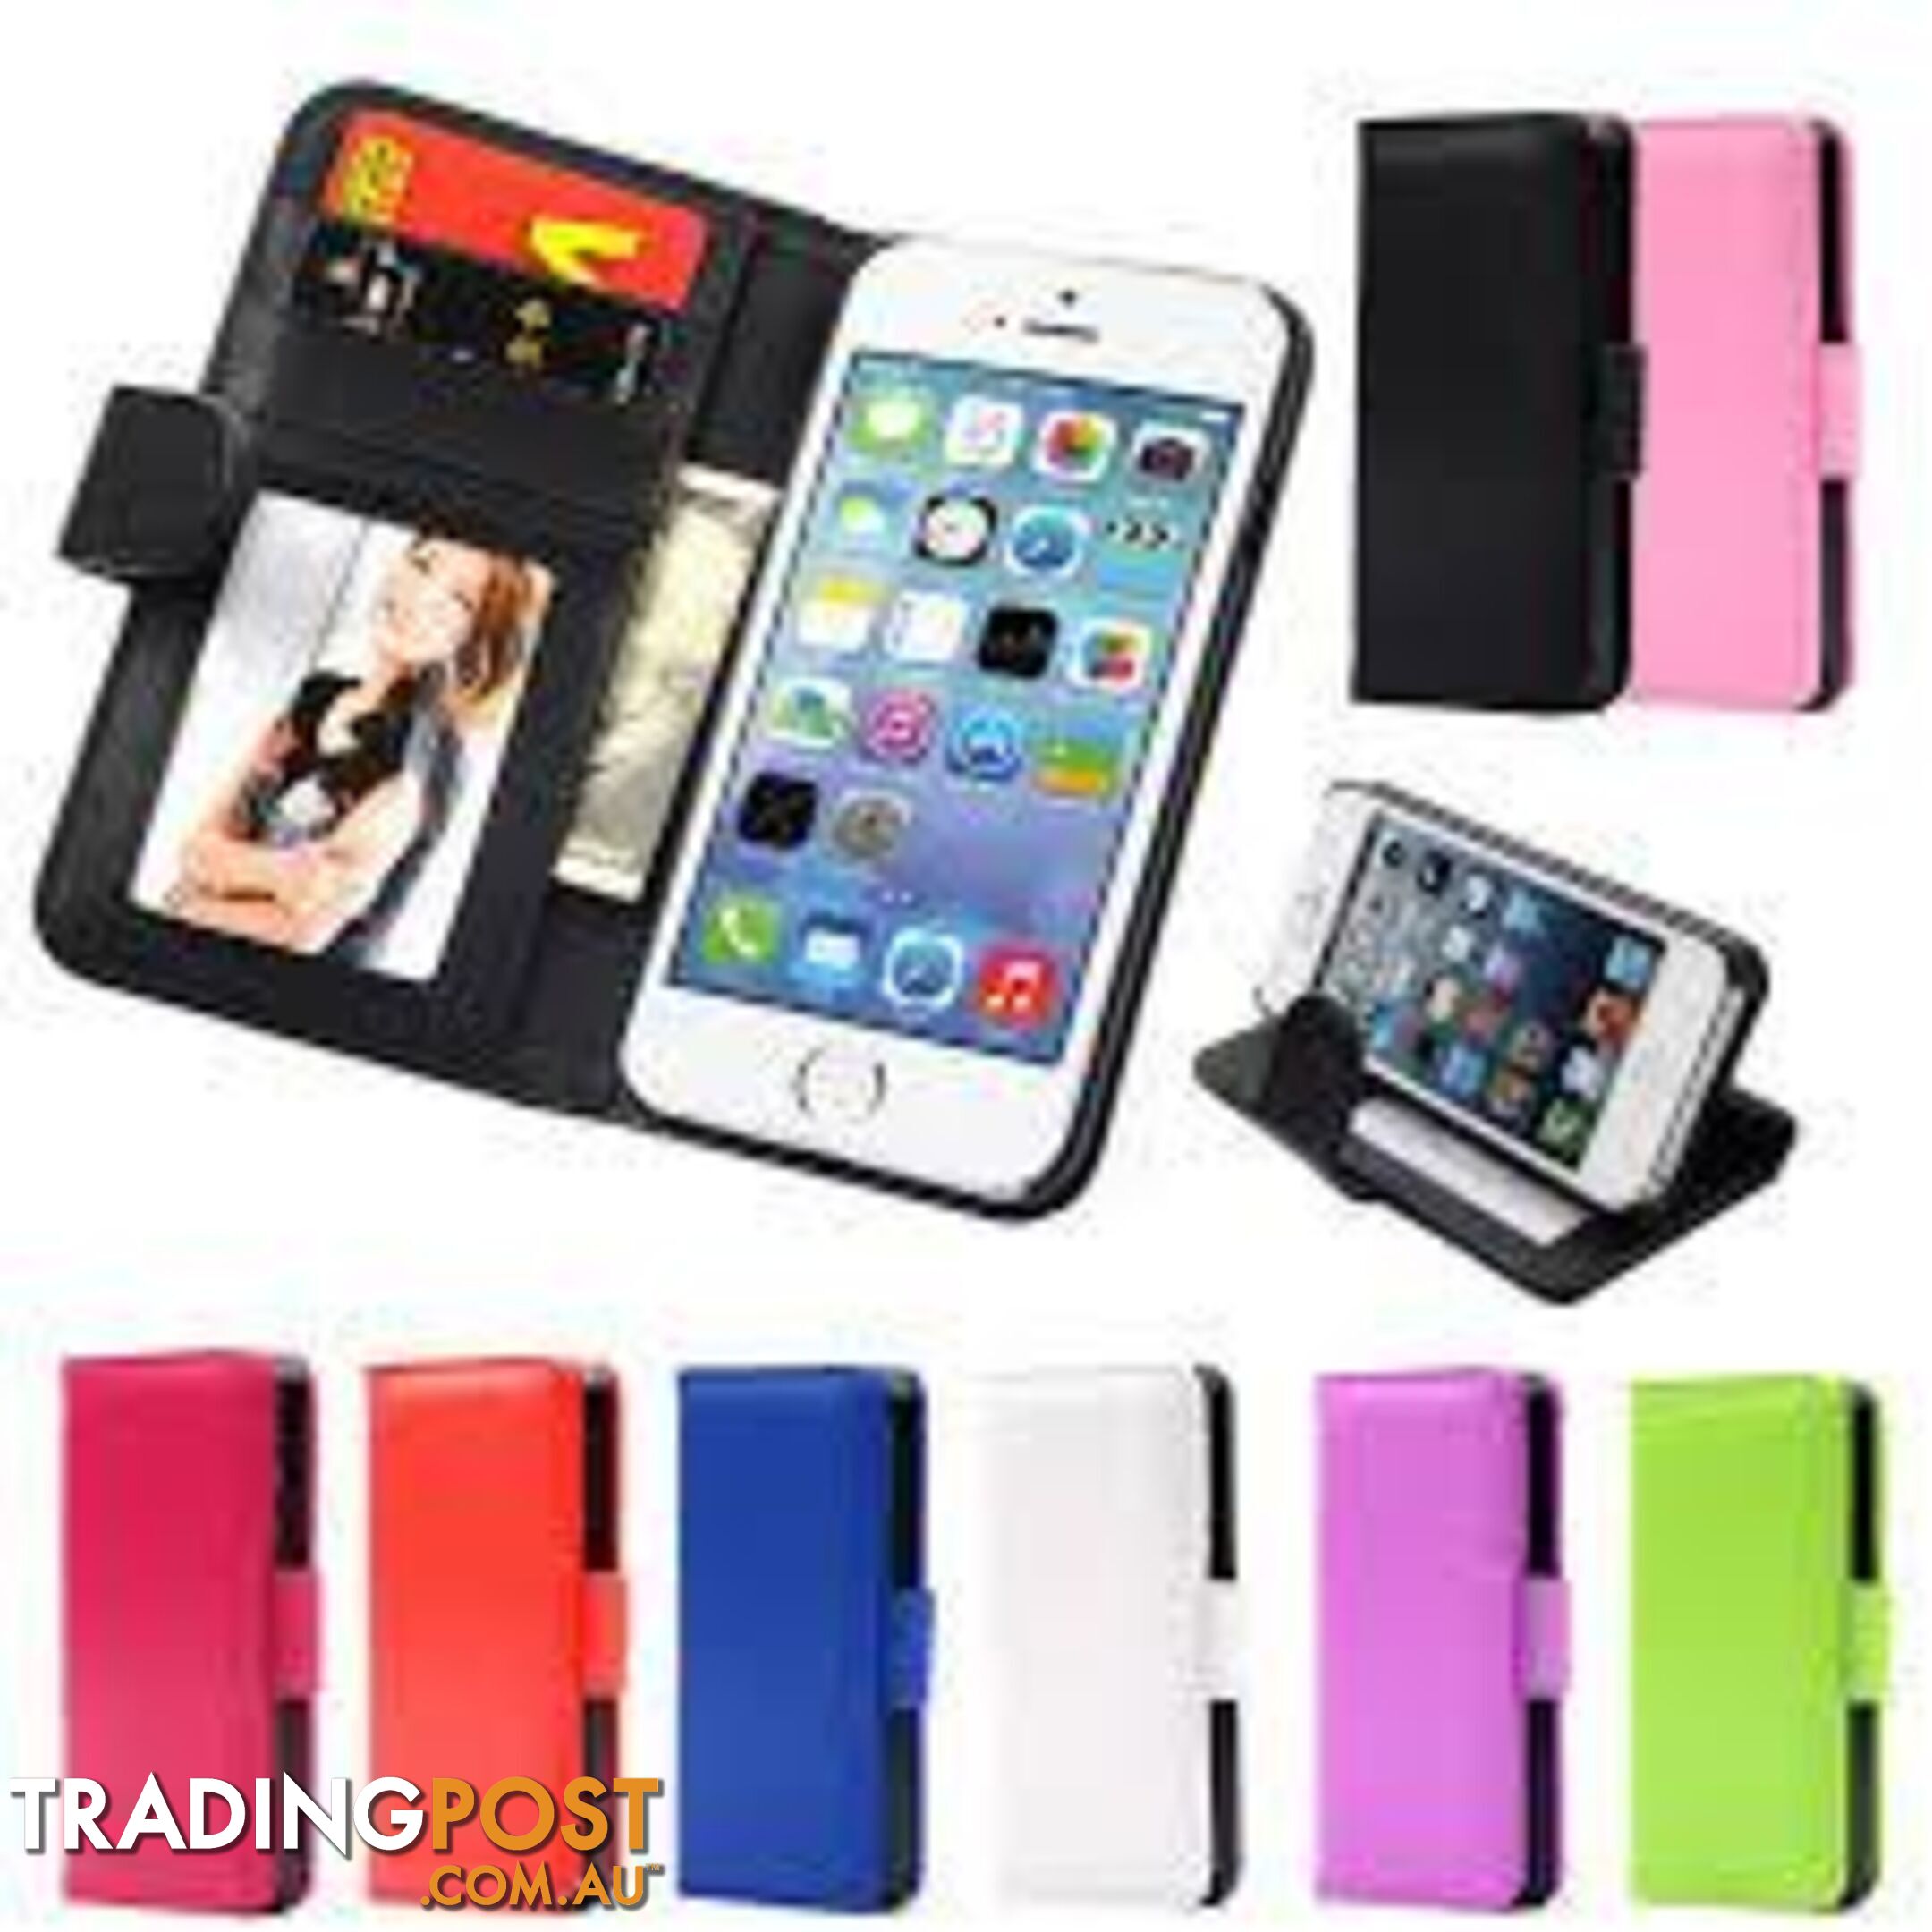 Apple iPhone Wallet Style Case - C6FDD5 - Cases